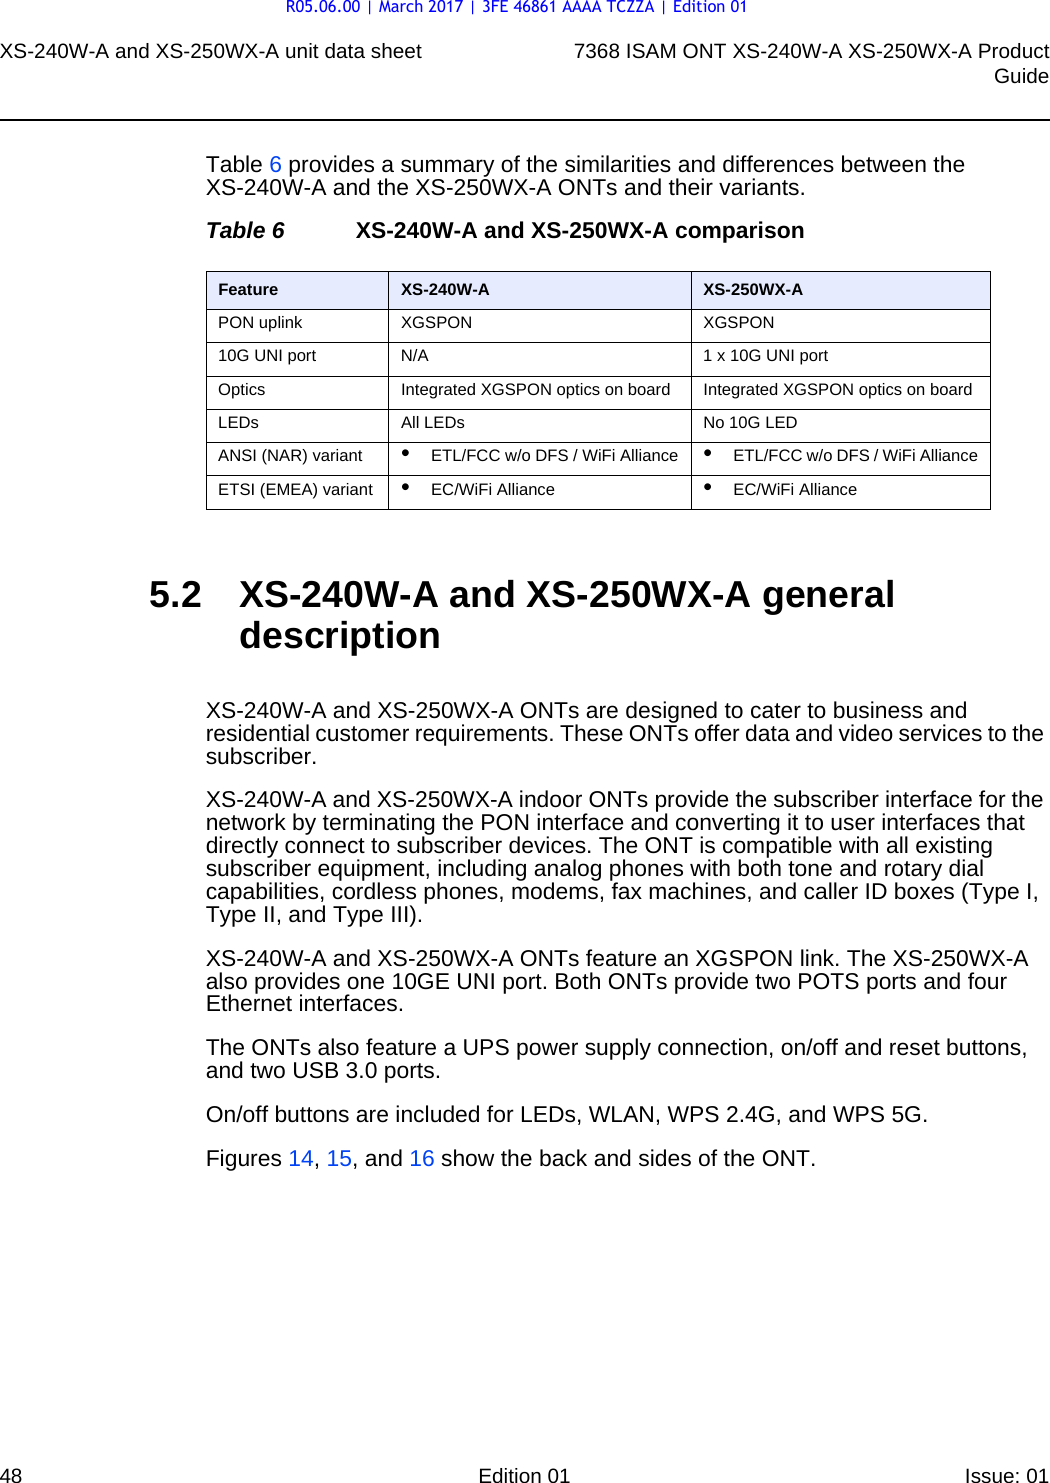 XS-240W-A and XS-250WX-A unit data sheet487368 ISAM ONT XS-240W-A XS-250WX-A ProductGuideEdition 01 Issue: 01 Table 6 provides a summary of the similarities and differences between the XS-240W-A and the XS-250WX-A ONTs and their variants.Table 6 XS-240W-A and XS-250WX-A comparison5.2 XS-240W-A and XS-250WX-A general descriptionXS-240W-A and XS-250WX-A ONTs are designed to cater to business and residential customer requirements. These ONTs offer data and video services to the subscriber.XS-240W-A and XS-250WX-A indoor ONTs provide the subscriber interface for the network by terminating the PON interface and converting it to user interfaces that directly connect to subscriber devices. The ONT is compatible with all existing subscriber equipment, including analog phones with both tone and rotary dial capabilities, cordless phones, modems, fax machines, and caller ID boxes (Type I, Type II, and Type III). XS-240W-A and XS-250WX-A ONTs feature an XGSPON link. The XS-250WX-A also provides one 10GE UNI port. Both ONTs provide two POTS ports and four Ethernet interfaces. The ONTs also feature a UPS power supply connection, on/off and reset buttons, and two USB 3.0 ports.On/off buttons are included for LEDs, WLAN, WPS 2.4G, and WPS 5G.Figures 14, 15, and 16 show the back and sides of the ONT.Feature XS-240W-A XS-250WX-APON uplink XGSPON XGSPON10G UNI port N/A 1 x 10G UNI portOptics Integrated XGSPON optics on board Integrated XGSPON optics on boardLEDs All LEDs No 10G LEDANSI (NAR) variant •ETL/FCC w/o DFS / WiFi Alliance •ETL/FCC w/o DFS / WiFi AllianceETSI (EMEA) variant •EC/WiFi Alliance •EC/WiFi AllianceR05.06.00 | March 2017 | 3FE 46861 AAAA TCZZA | Edition 01